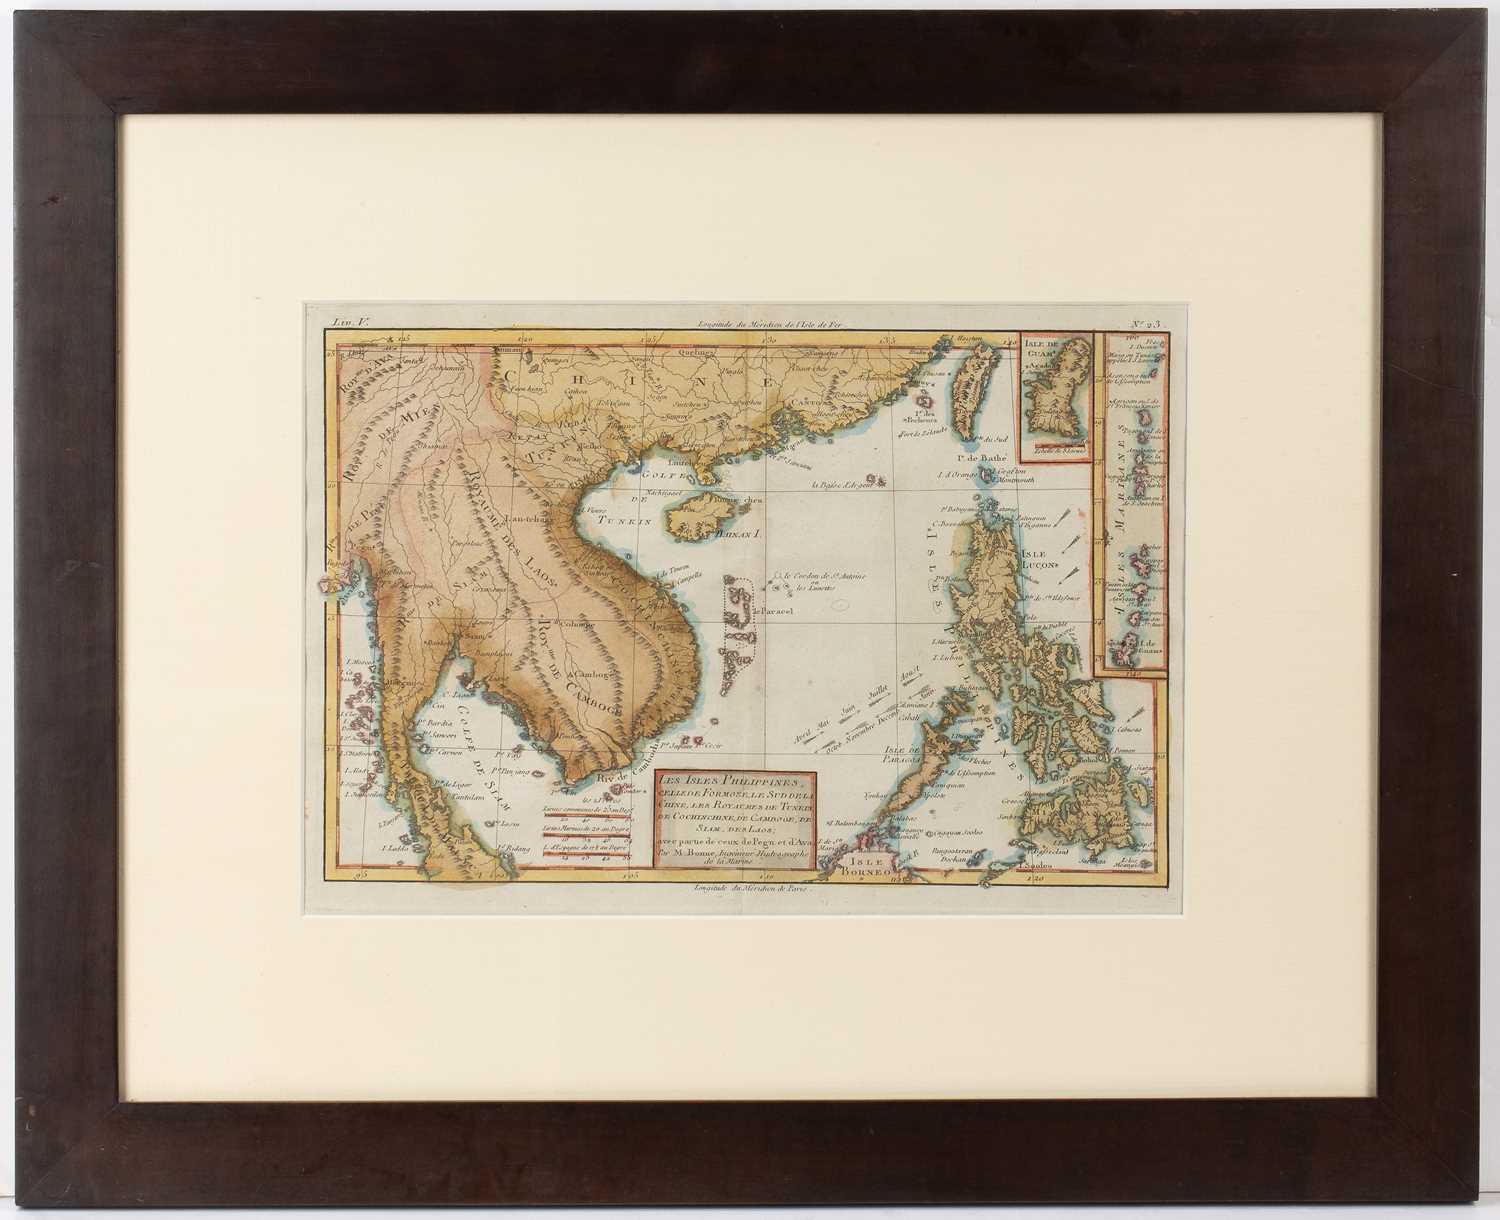 Les Isles Philippines, M Bonne, hand coloured engraving. 20.5cm x 31cm, framed and glazed. - Image 2 of 2